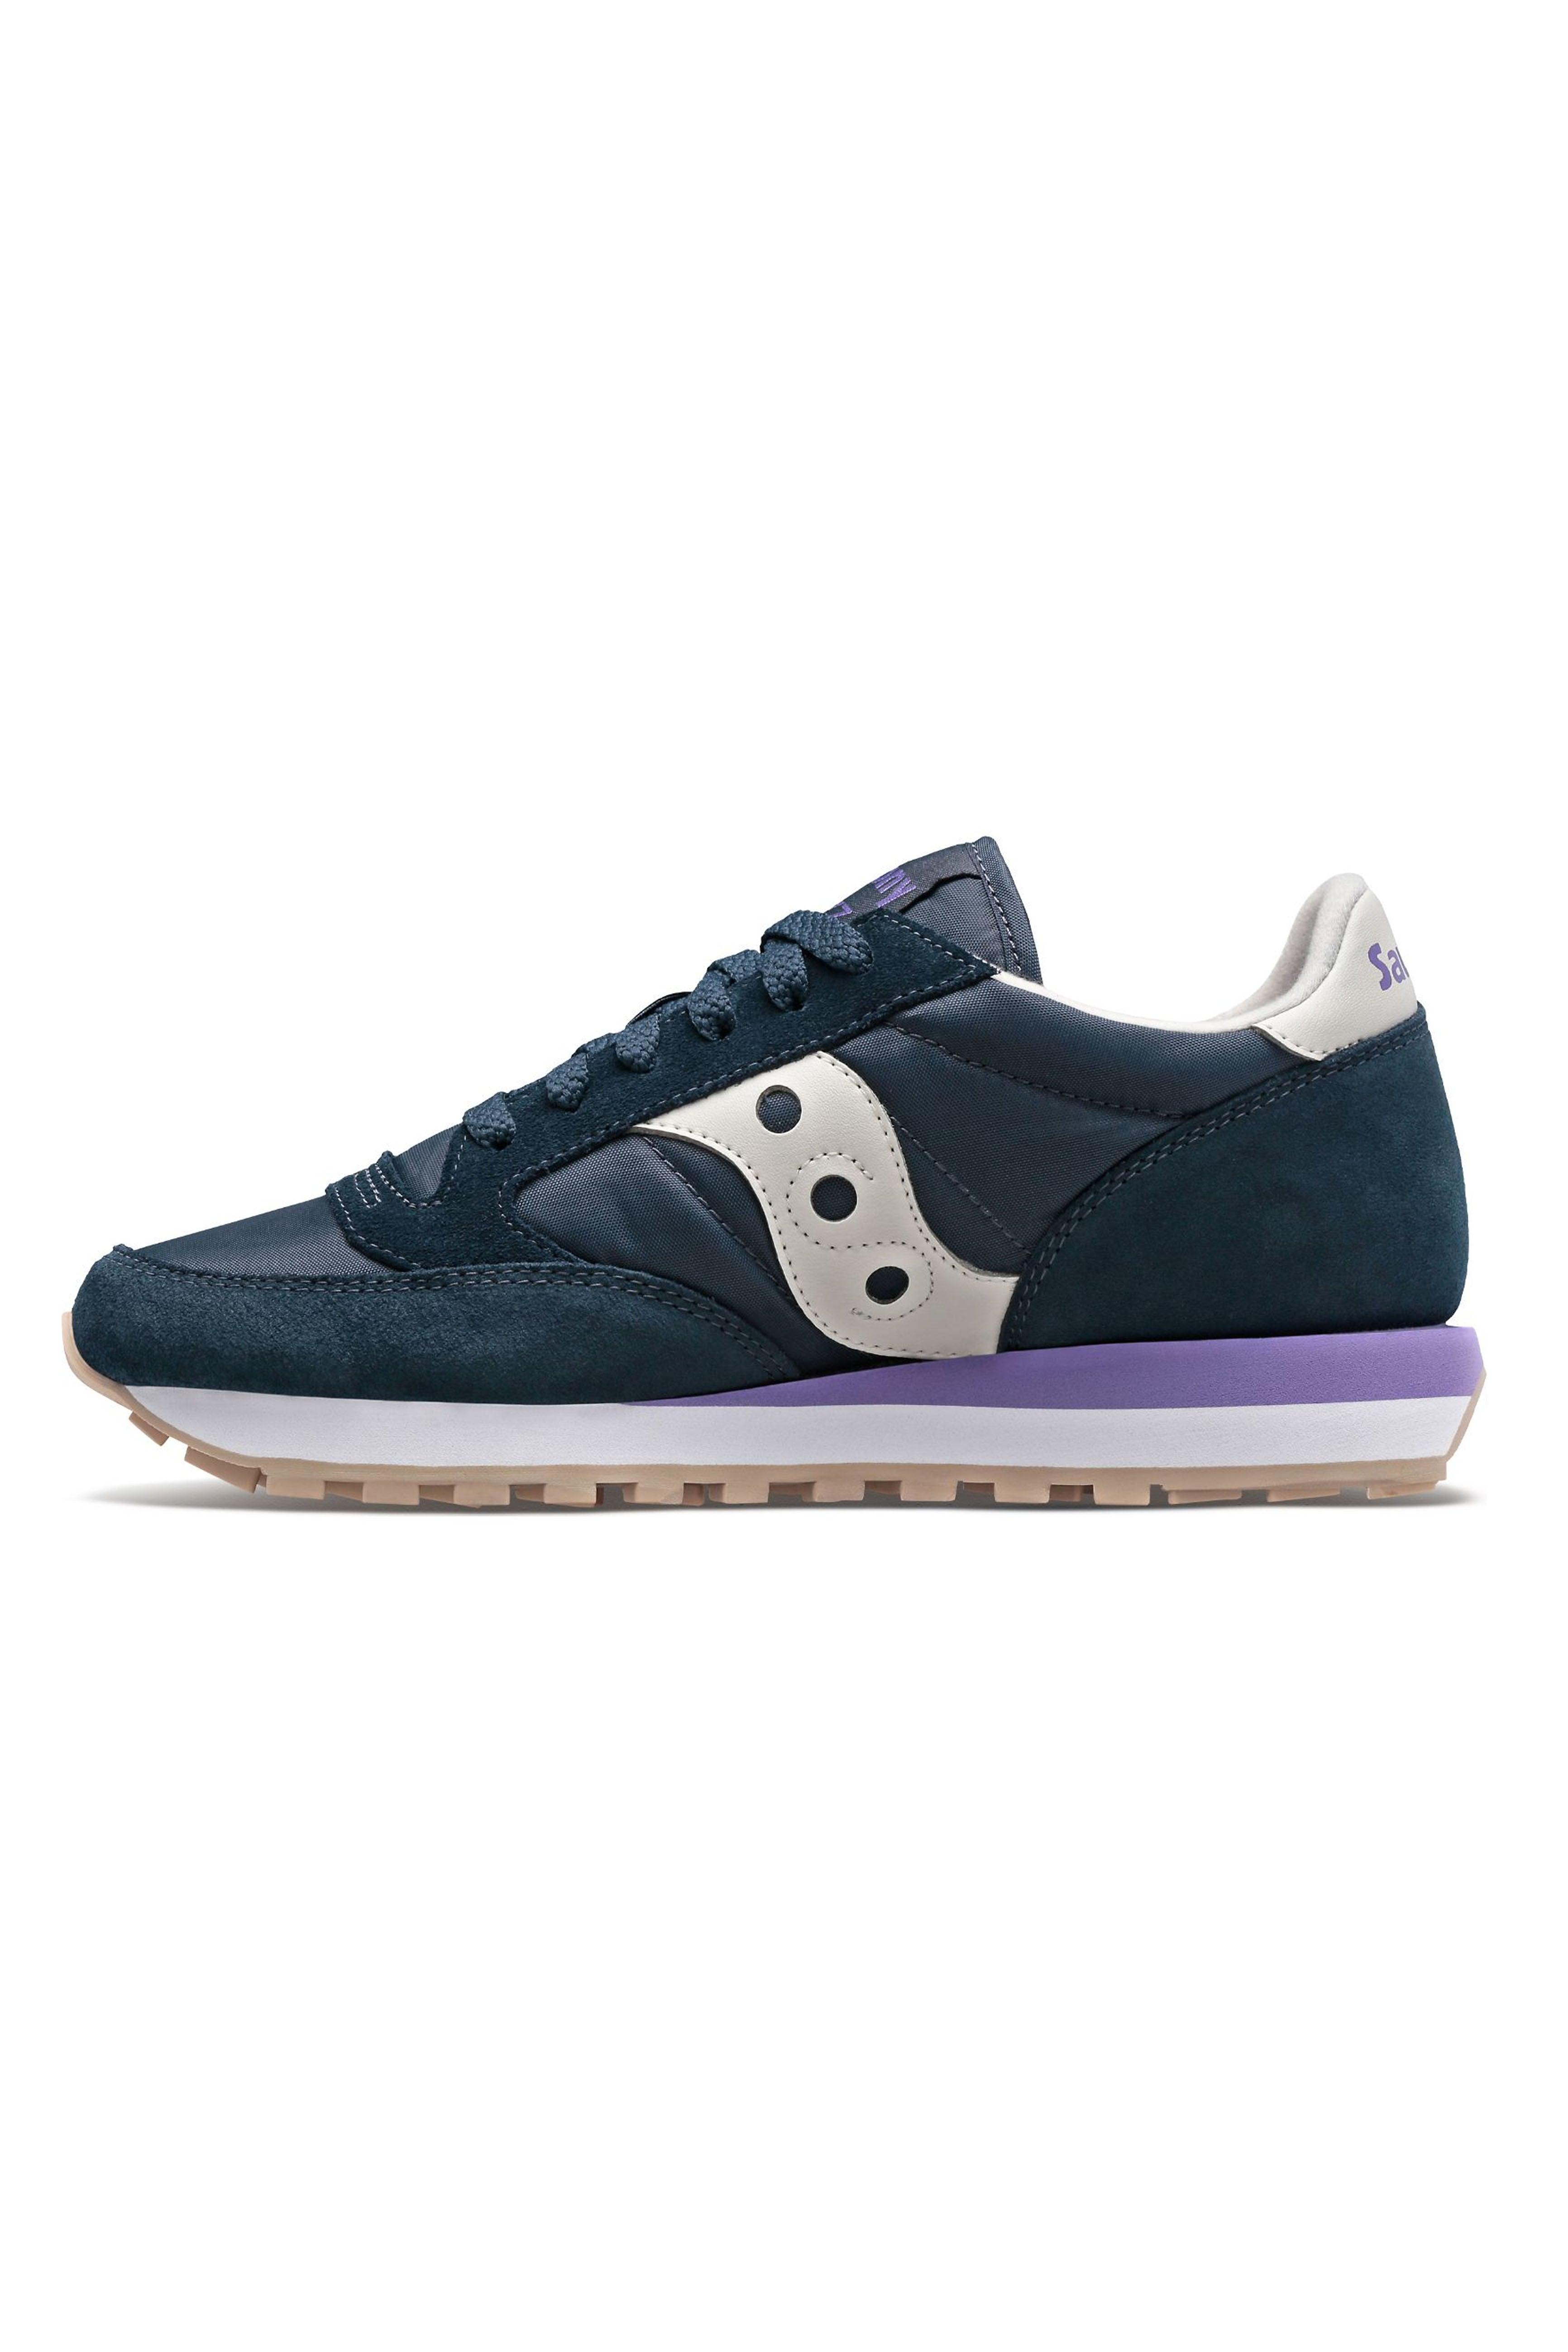 Details about   SAUCONY women shoes Blue nylon and suede Jazz Original sneaker silver pink 